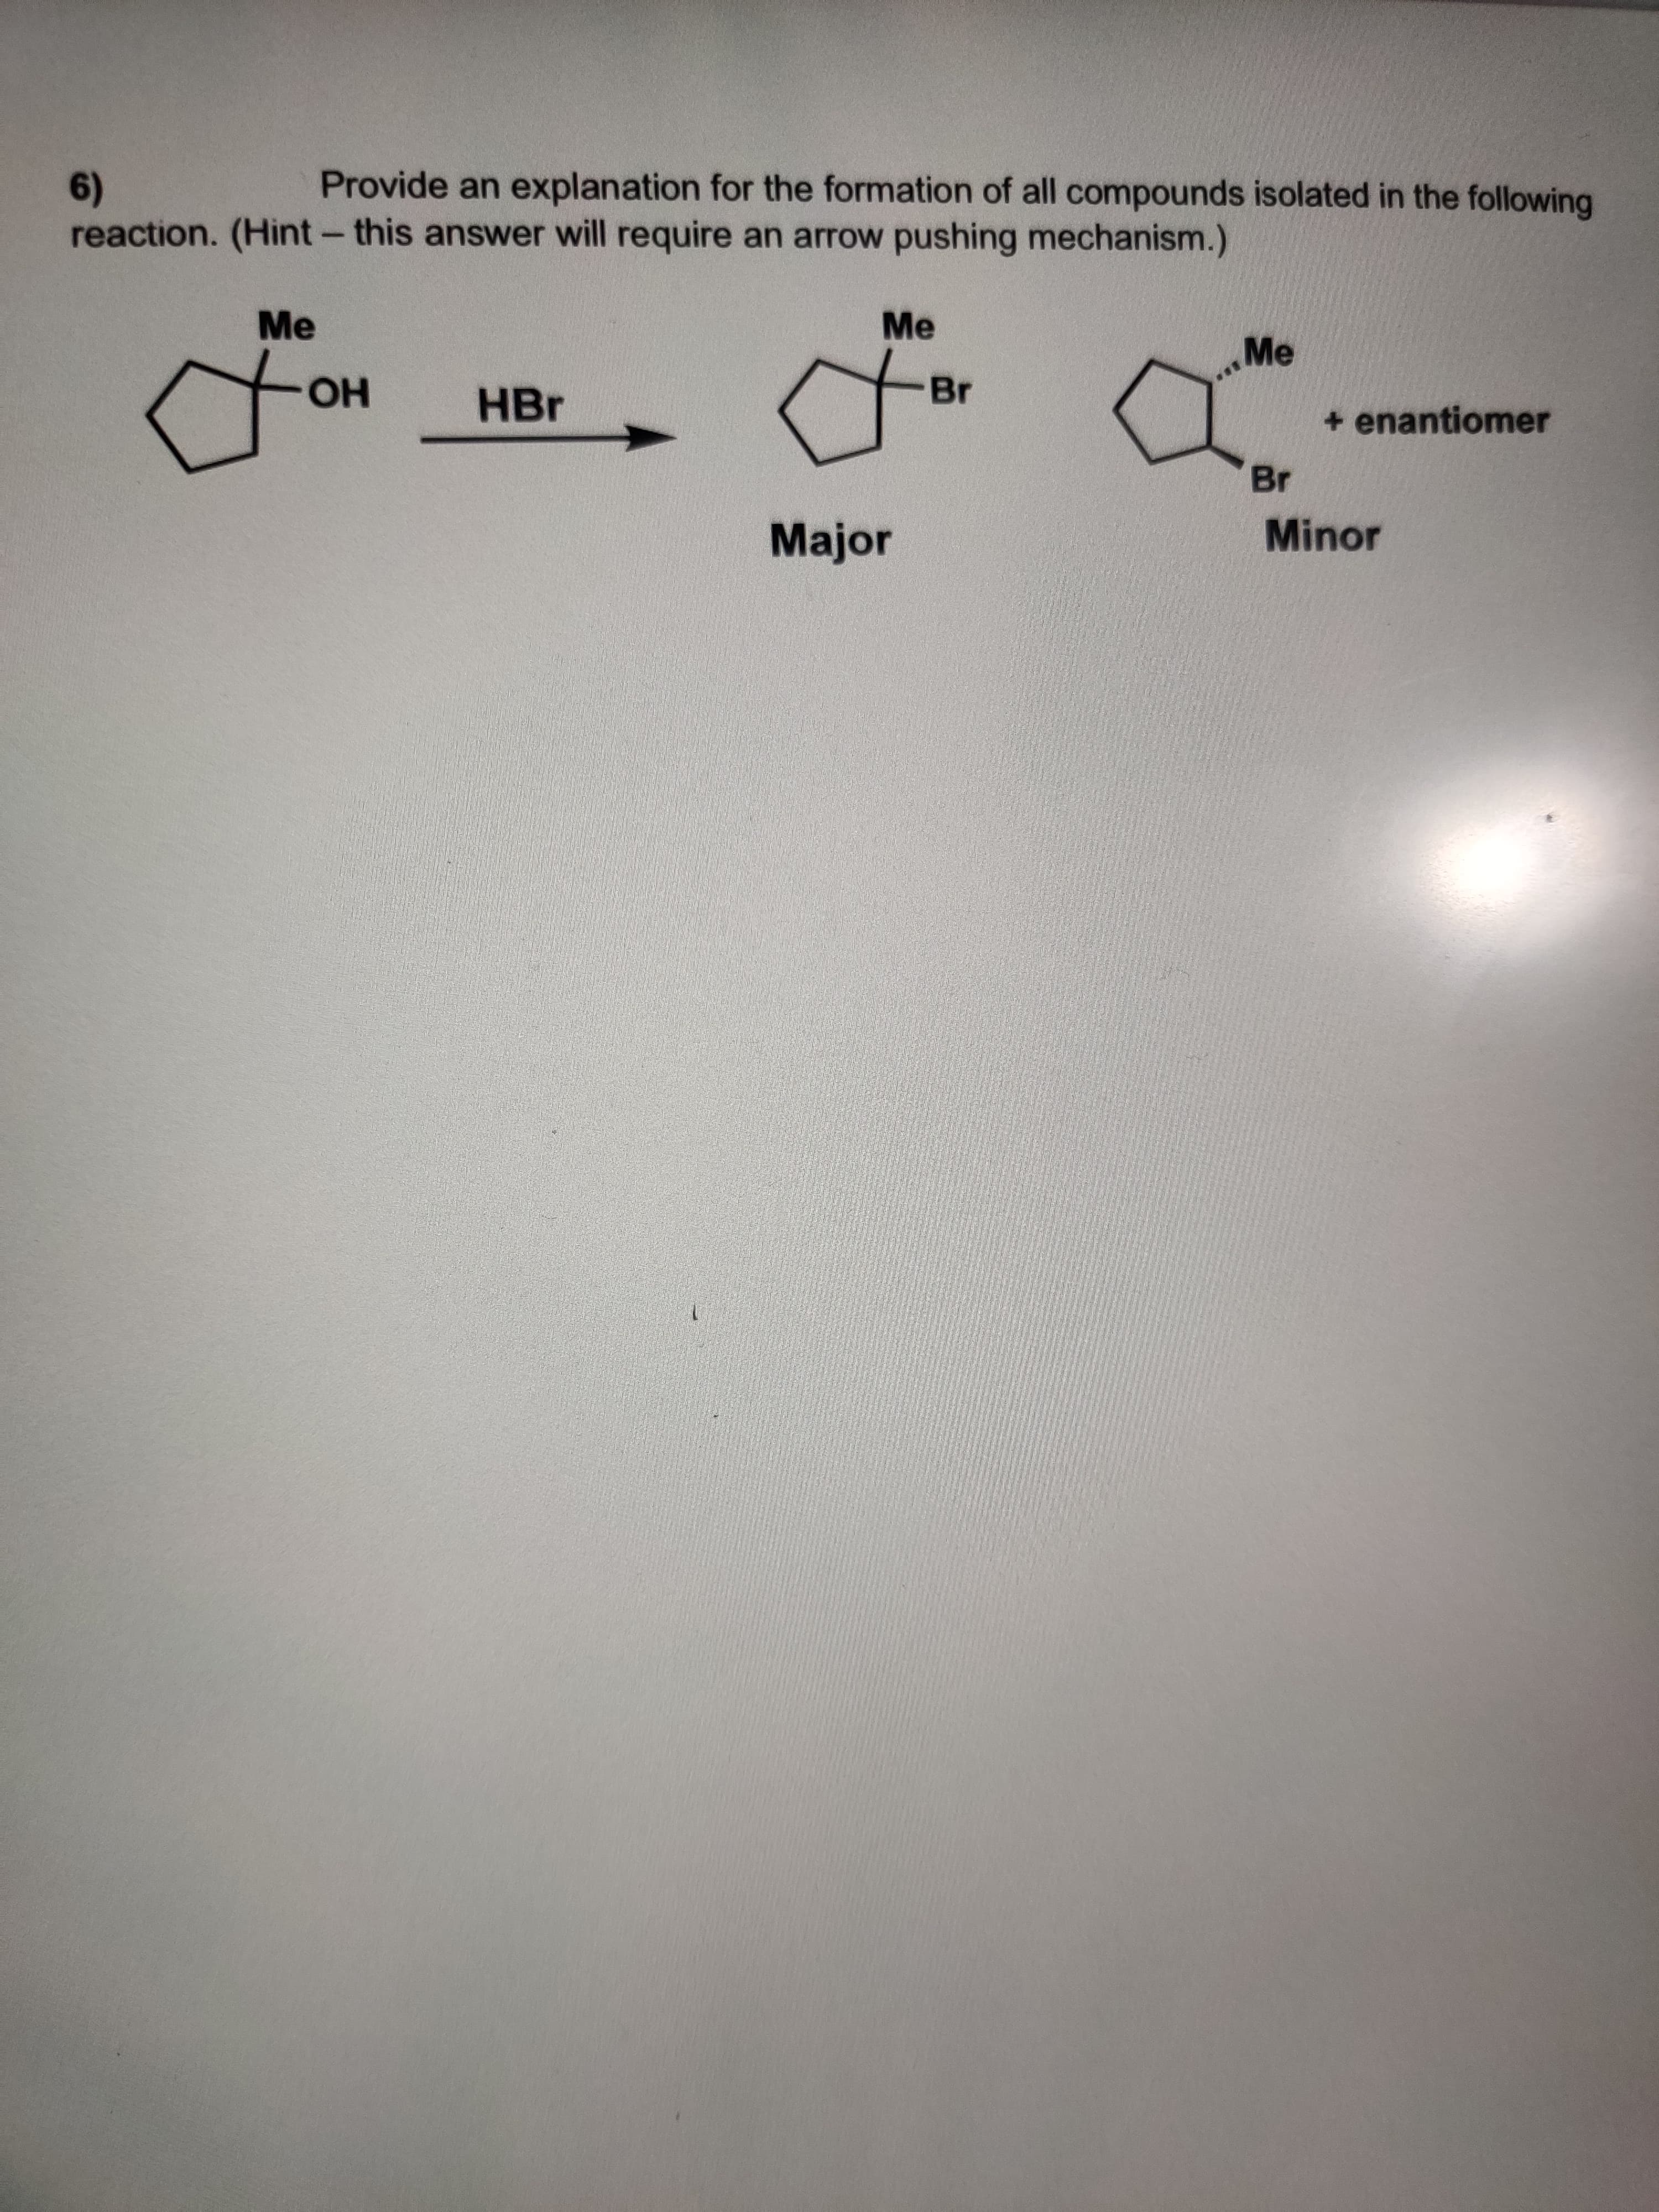 Provide an explanation for the formation of all compounds isolated in the following
6)
reaction. (Hint- this answer will require an arrow pushing mechanism.)
Me
Me
Me
Br
HBr
+ enantiomer
но
Br
Minor
Major
